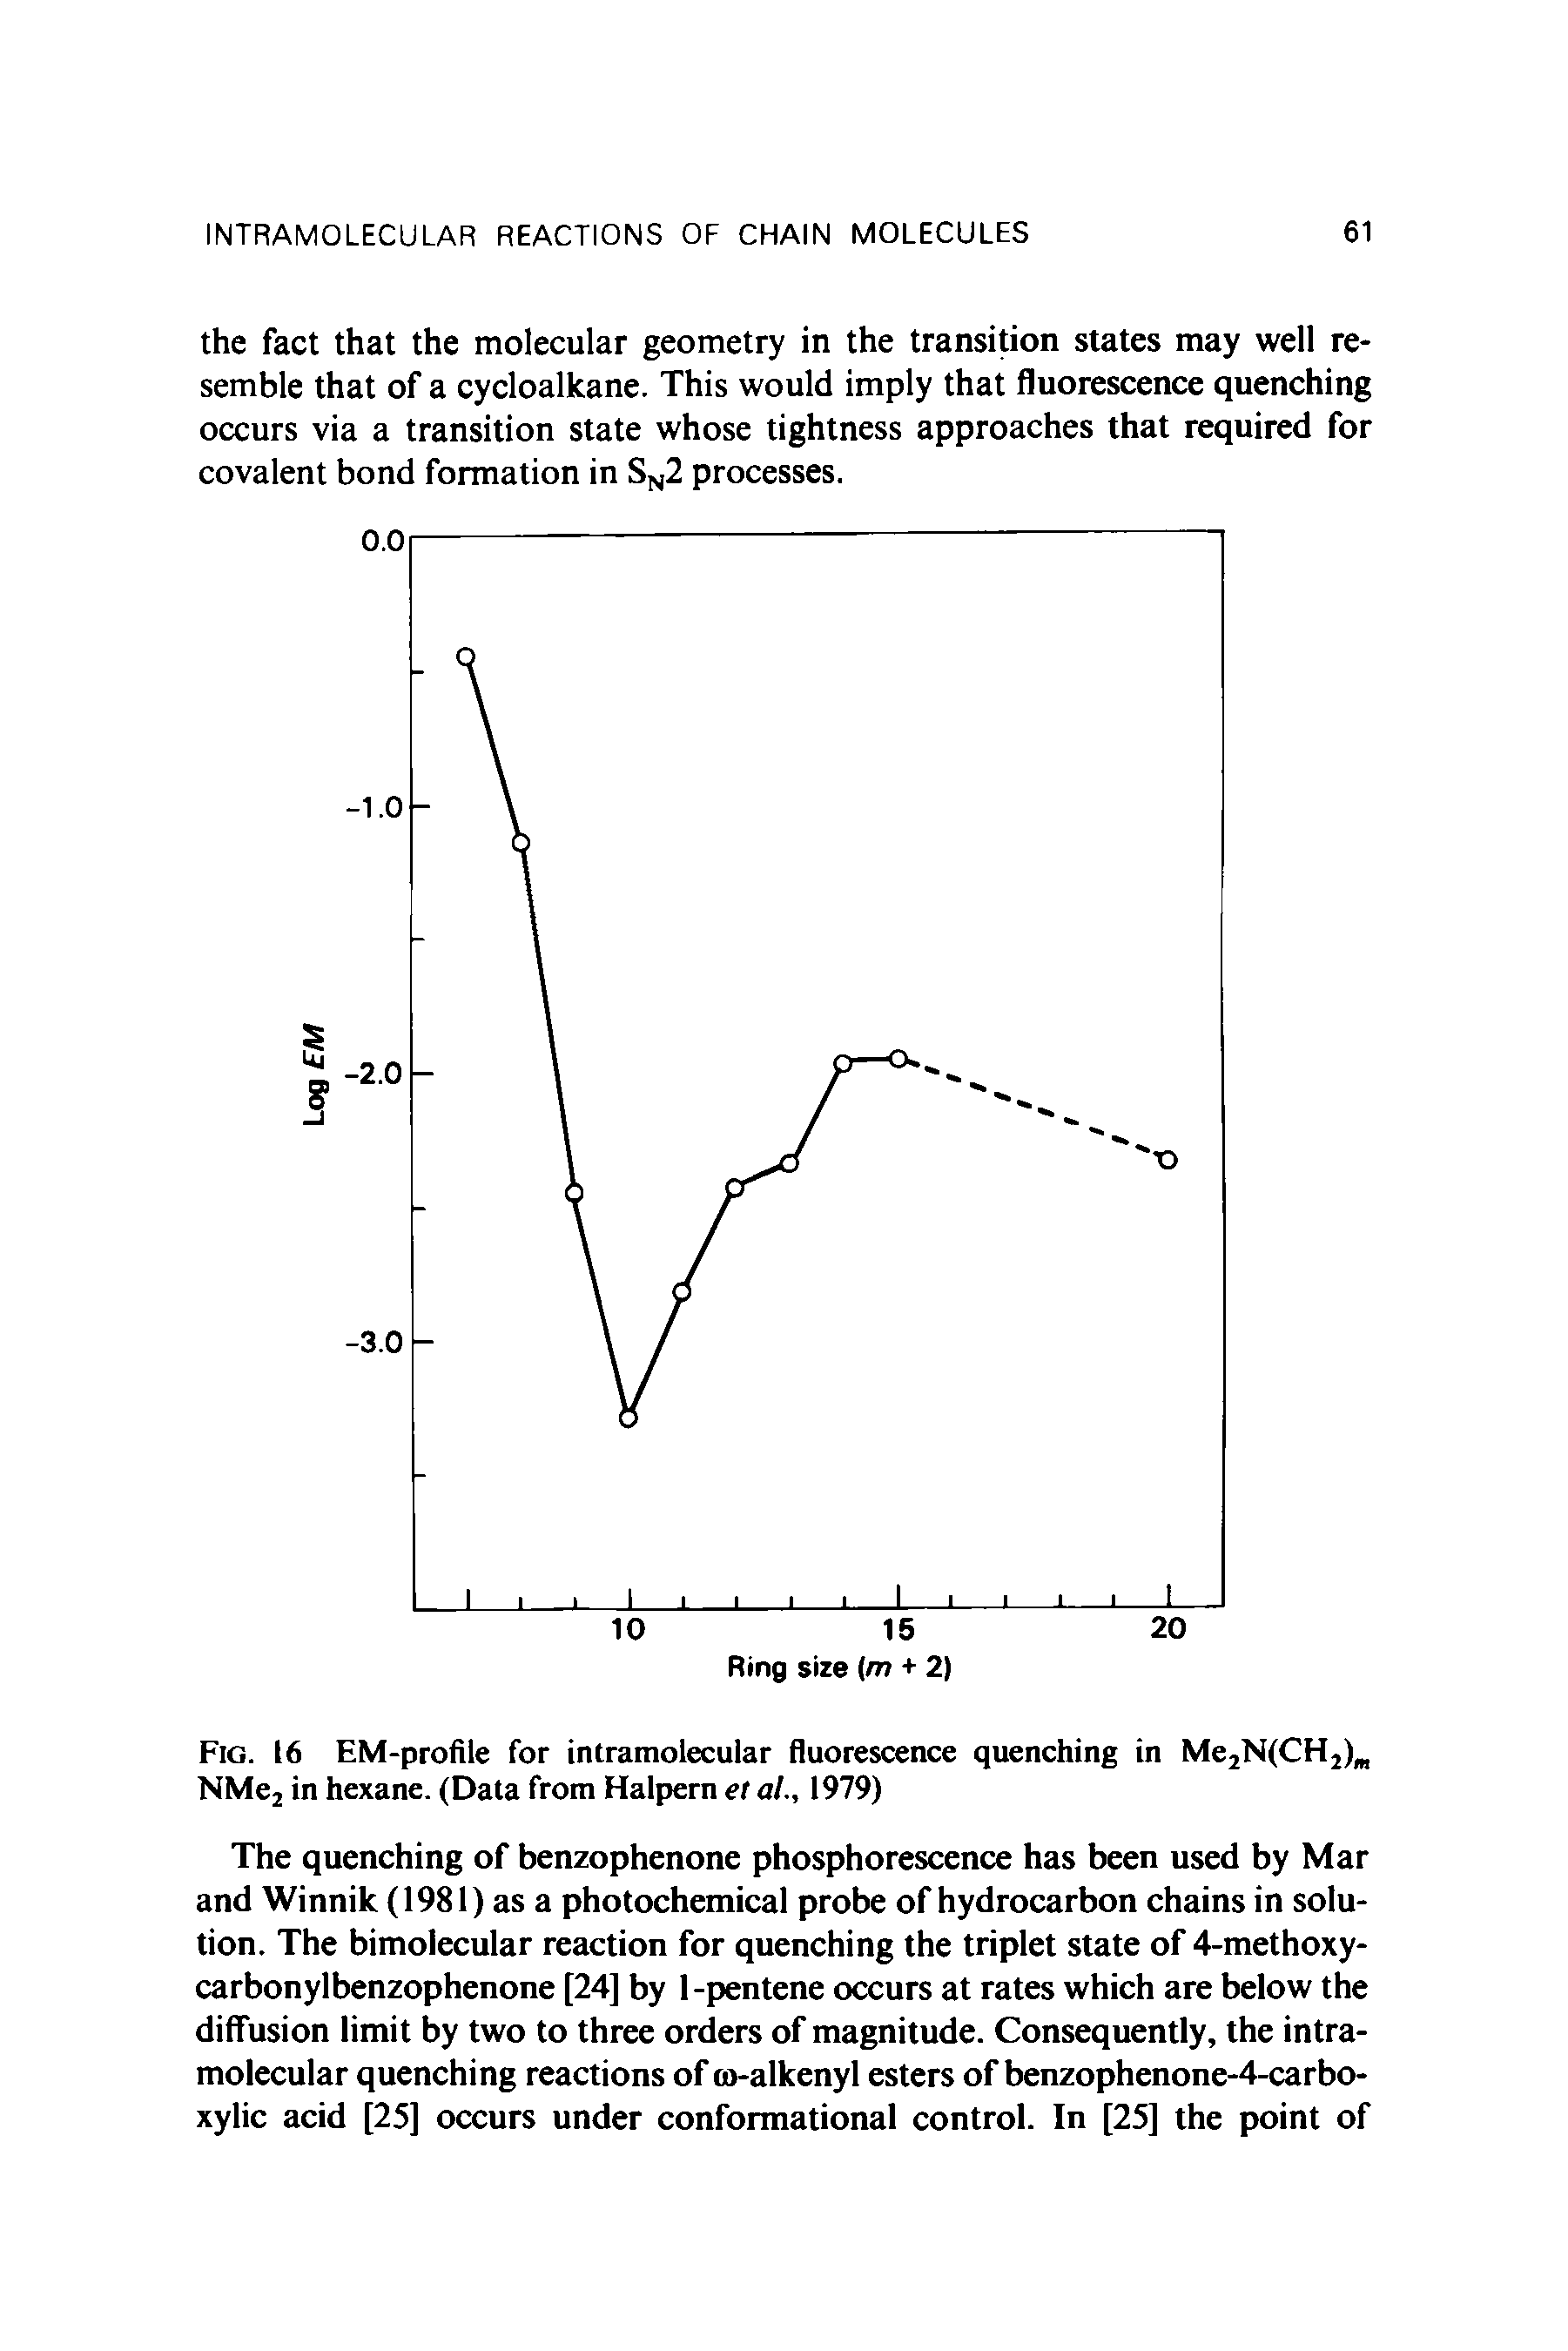 Fig. 16 EM-profile for intramolecular fluorescence quenching in Me2N(CH2)m NMe2 in hexane. (Data from Halpern et al., 1979)...